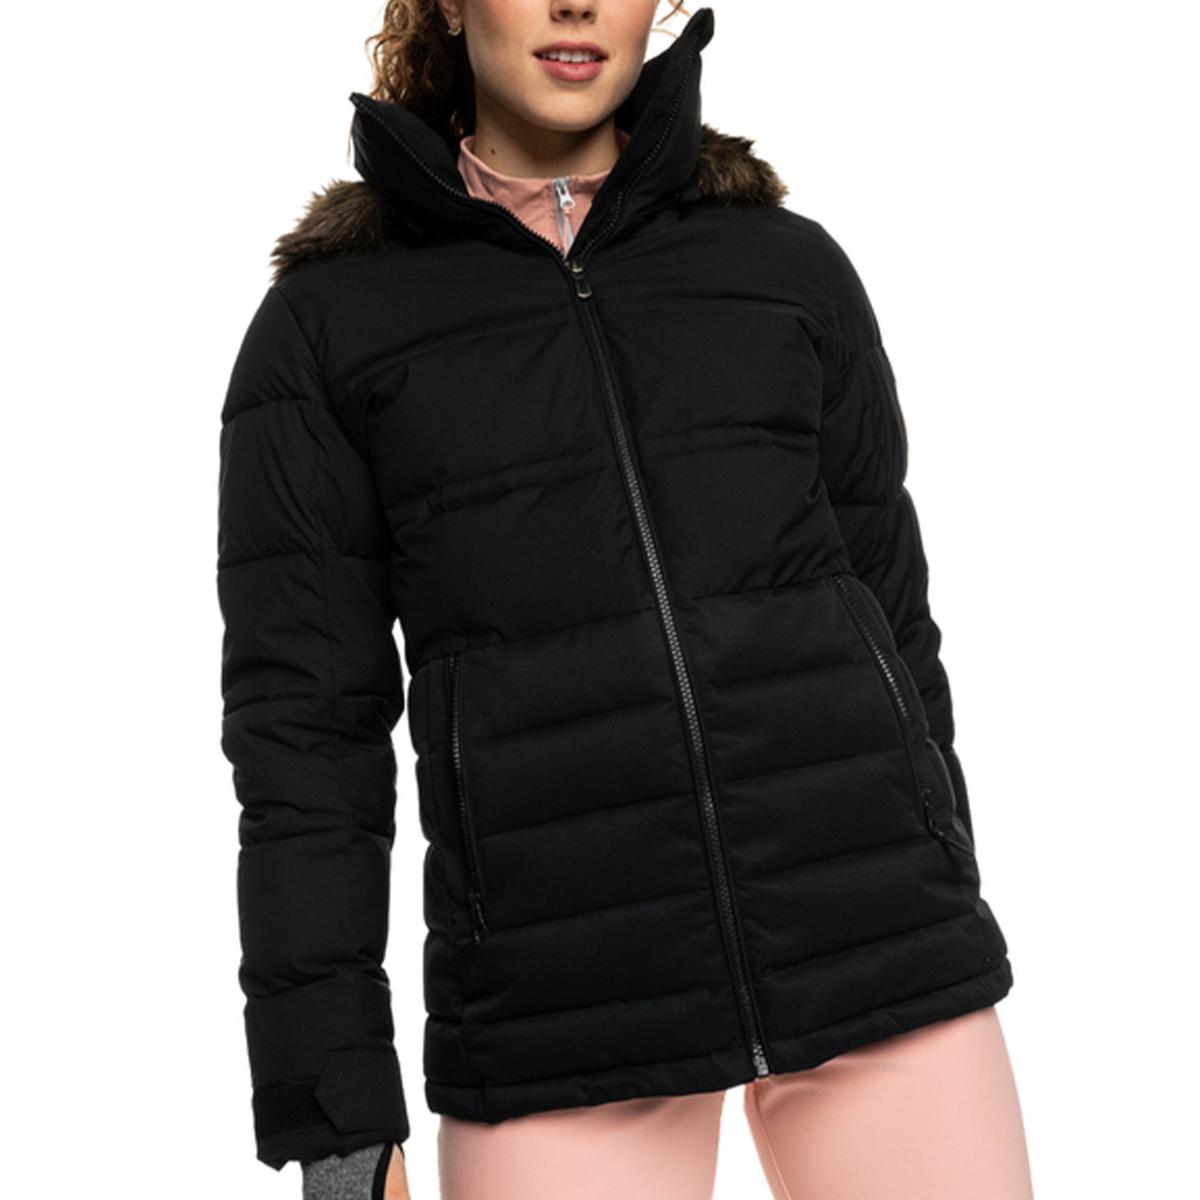 Stay warm and stylish on the slopes with the Roxy Dryflight